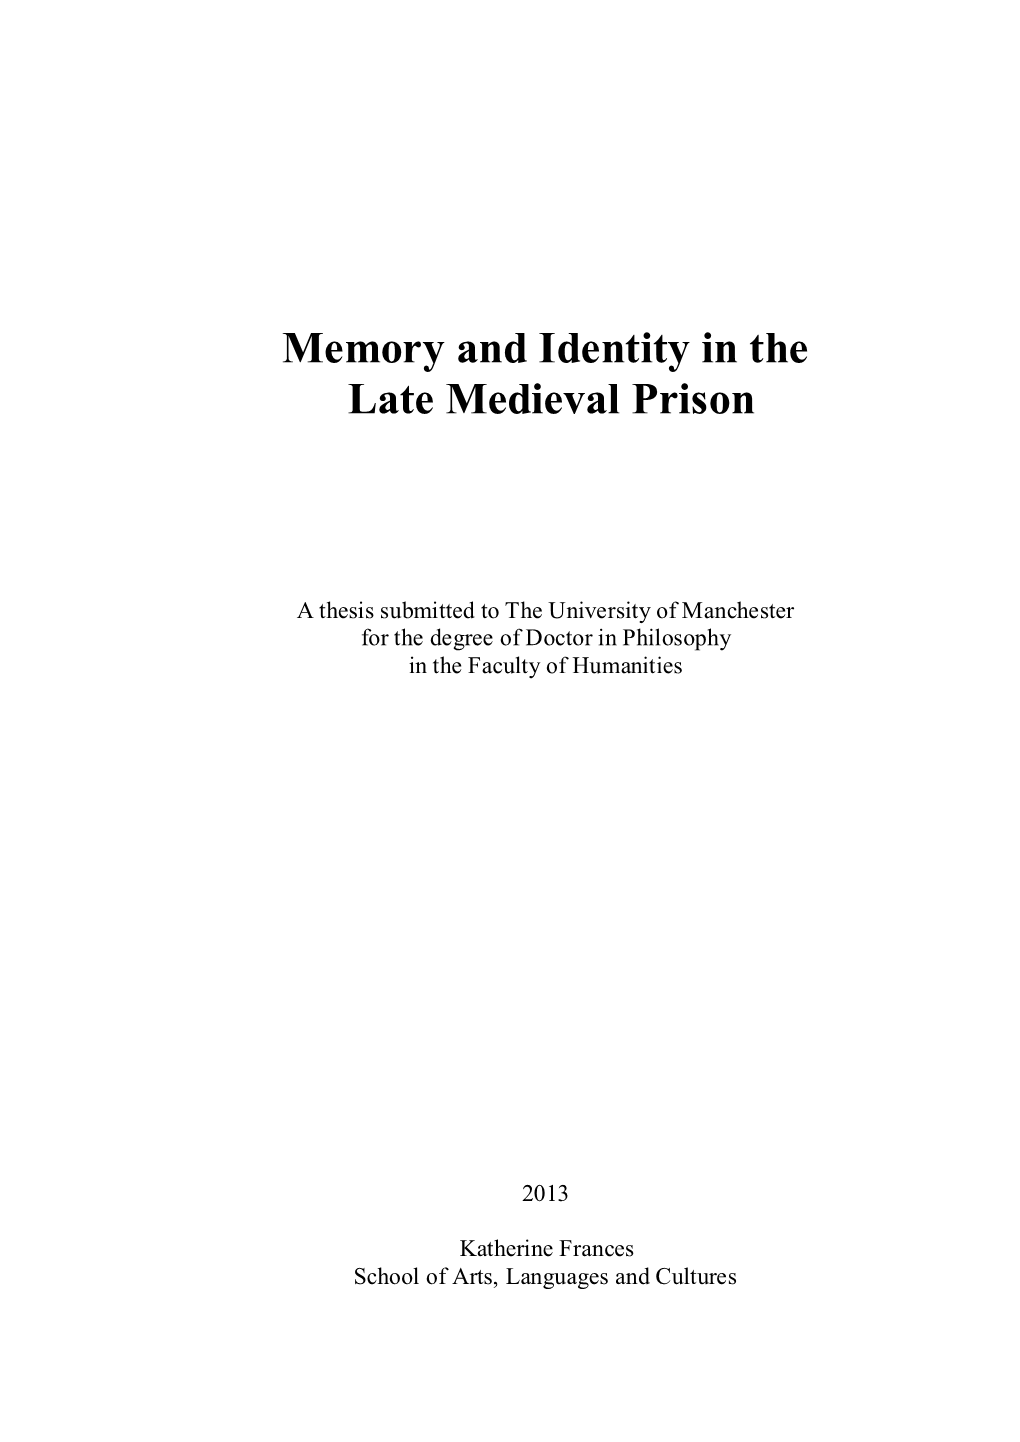 Memory and Identity in the Late Medieval Prison